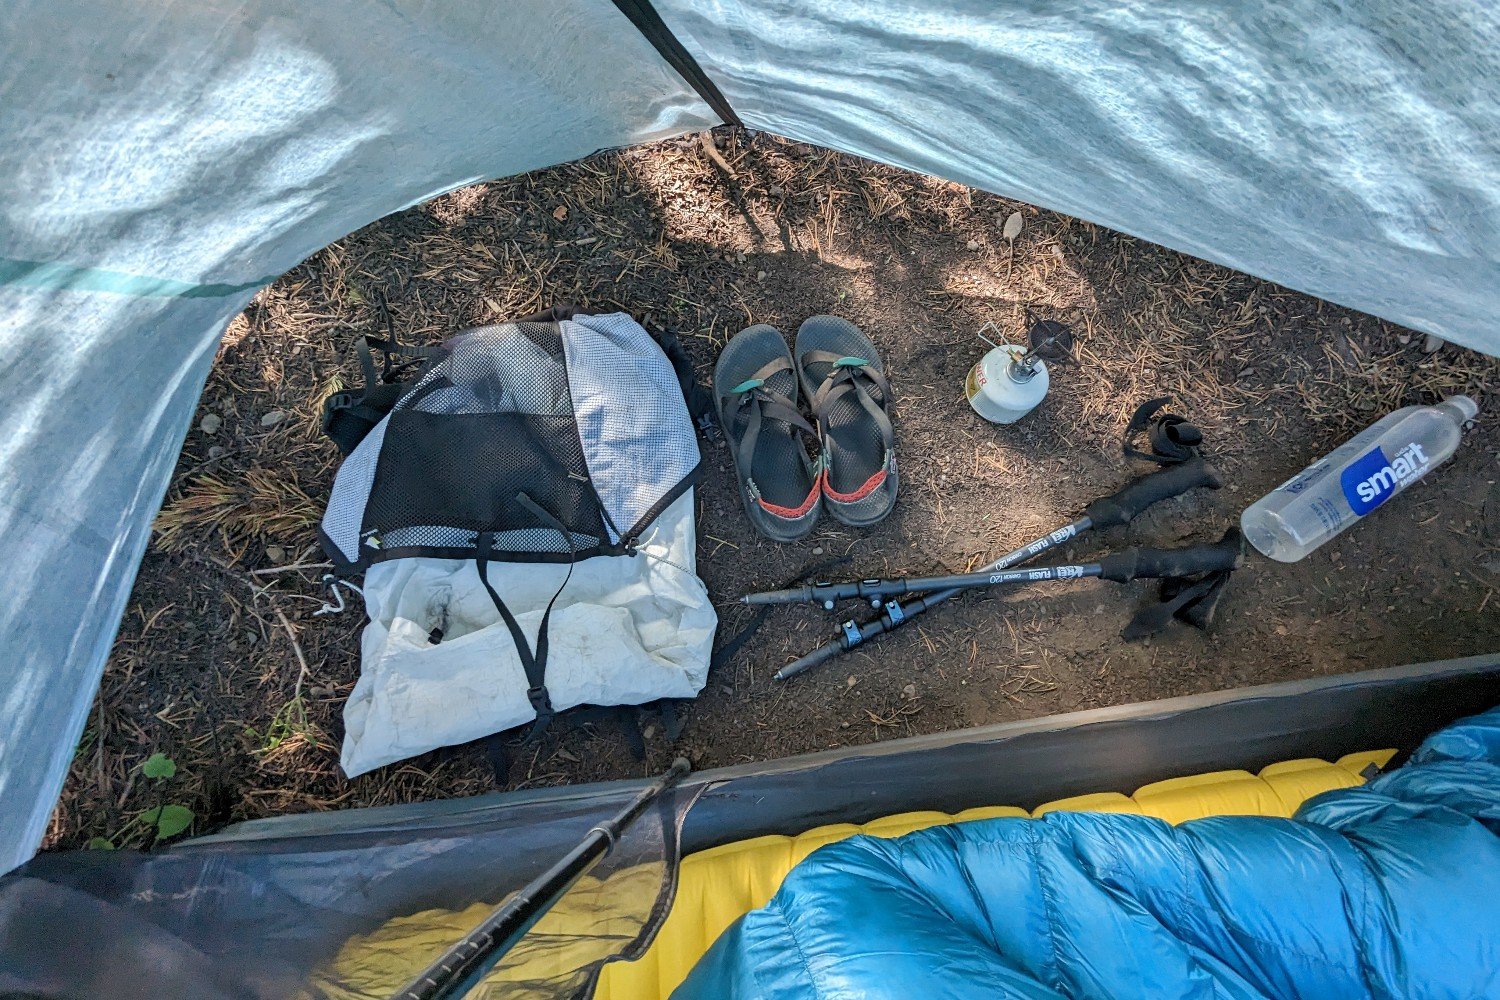 A backpack, some sandals, collapsed trekking poles, a backpacking stove, and a smartwater bottle laid out in the vestibule of the Durston X-Mid 2 Pro tent